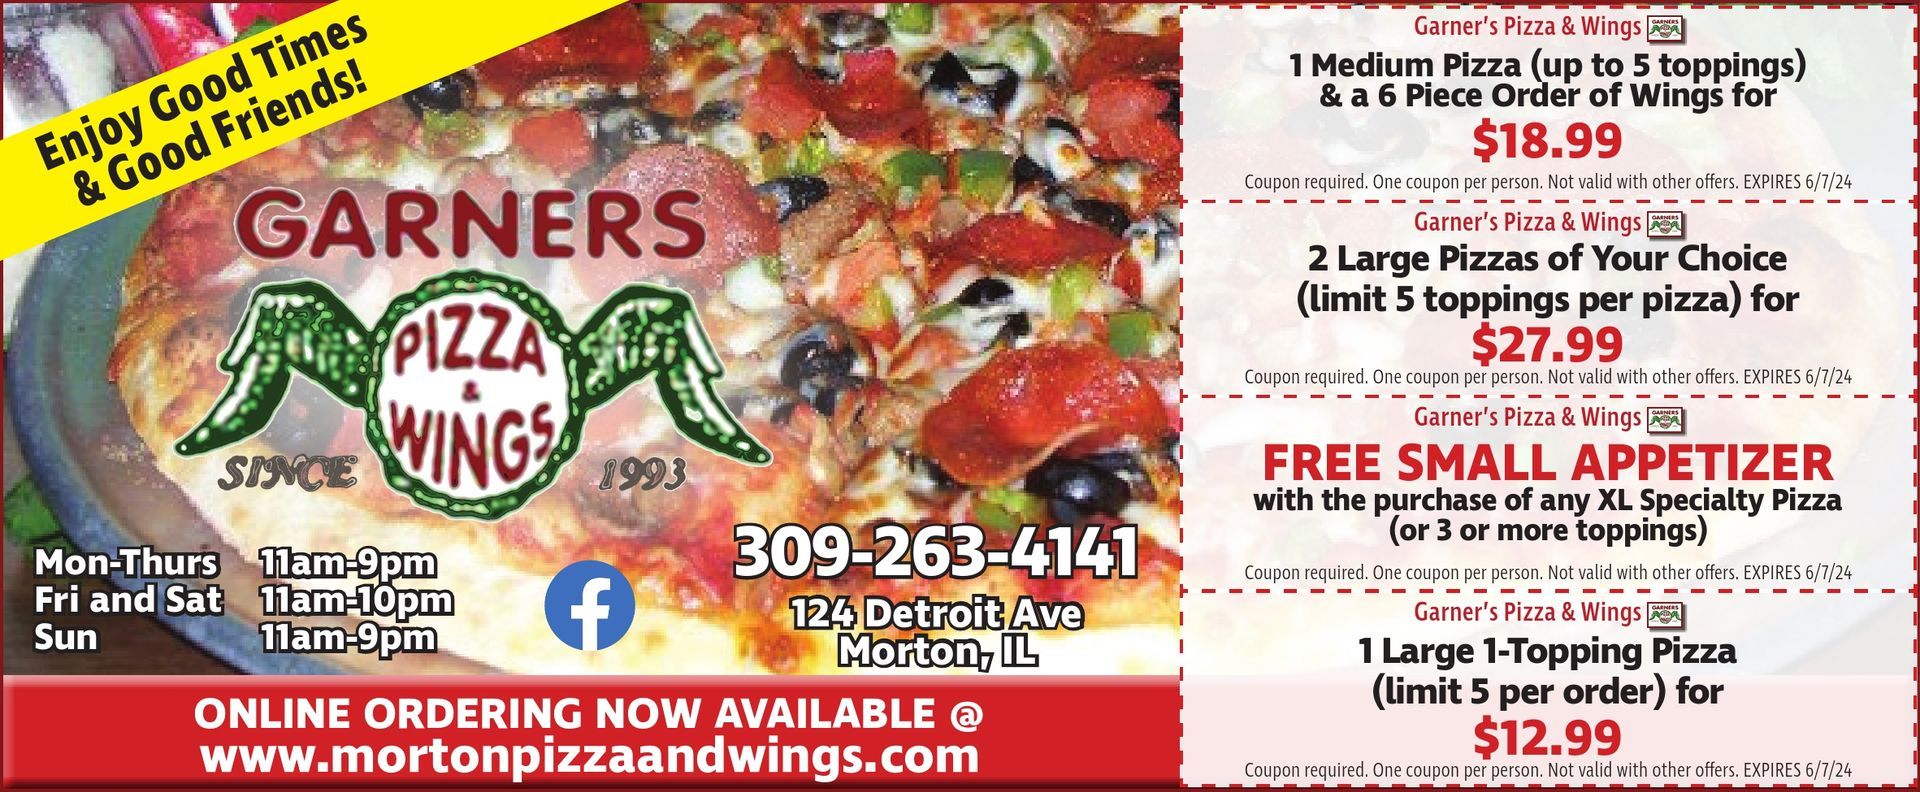 Garners Pizza and Wings pizza, wings, appetizer coupons Morton, IL